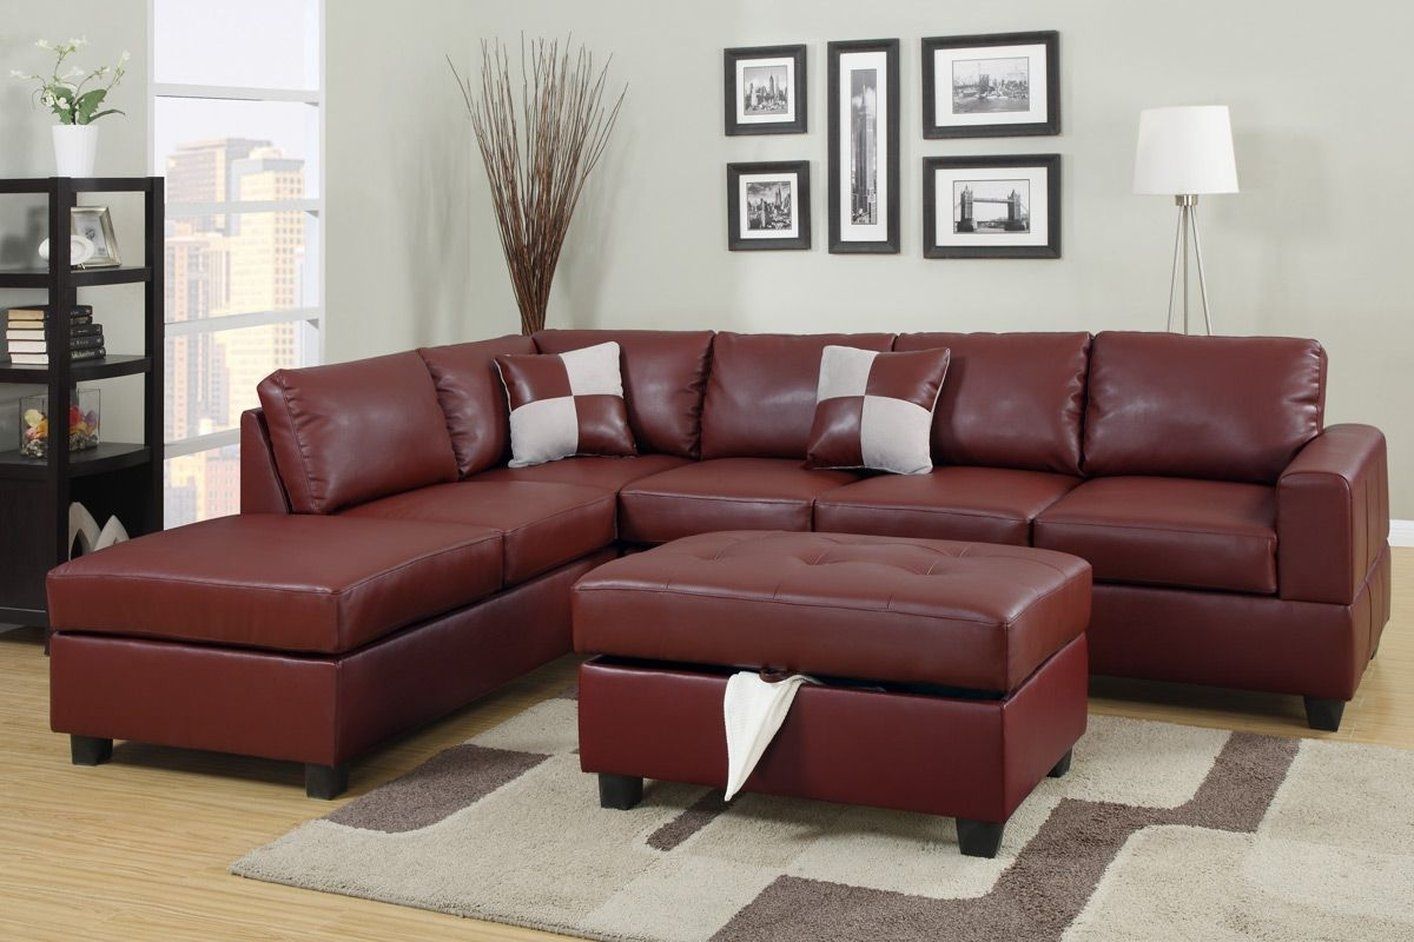 Featured Photo of 15 Ideas of Red Leather Sectional Sofas with Ottoman